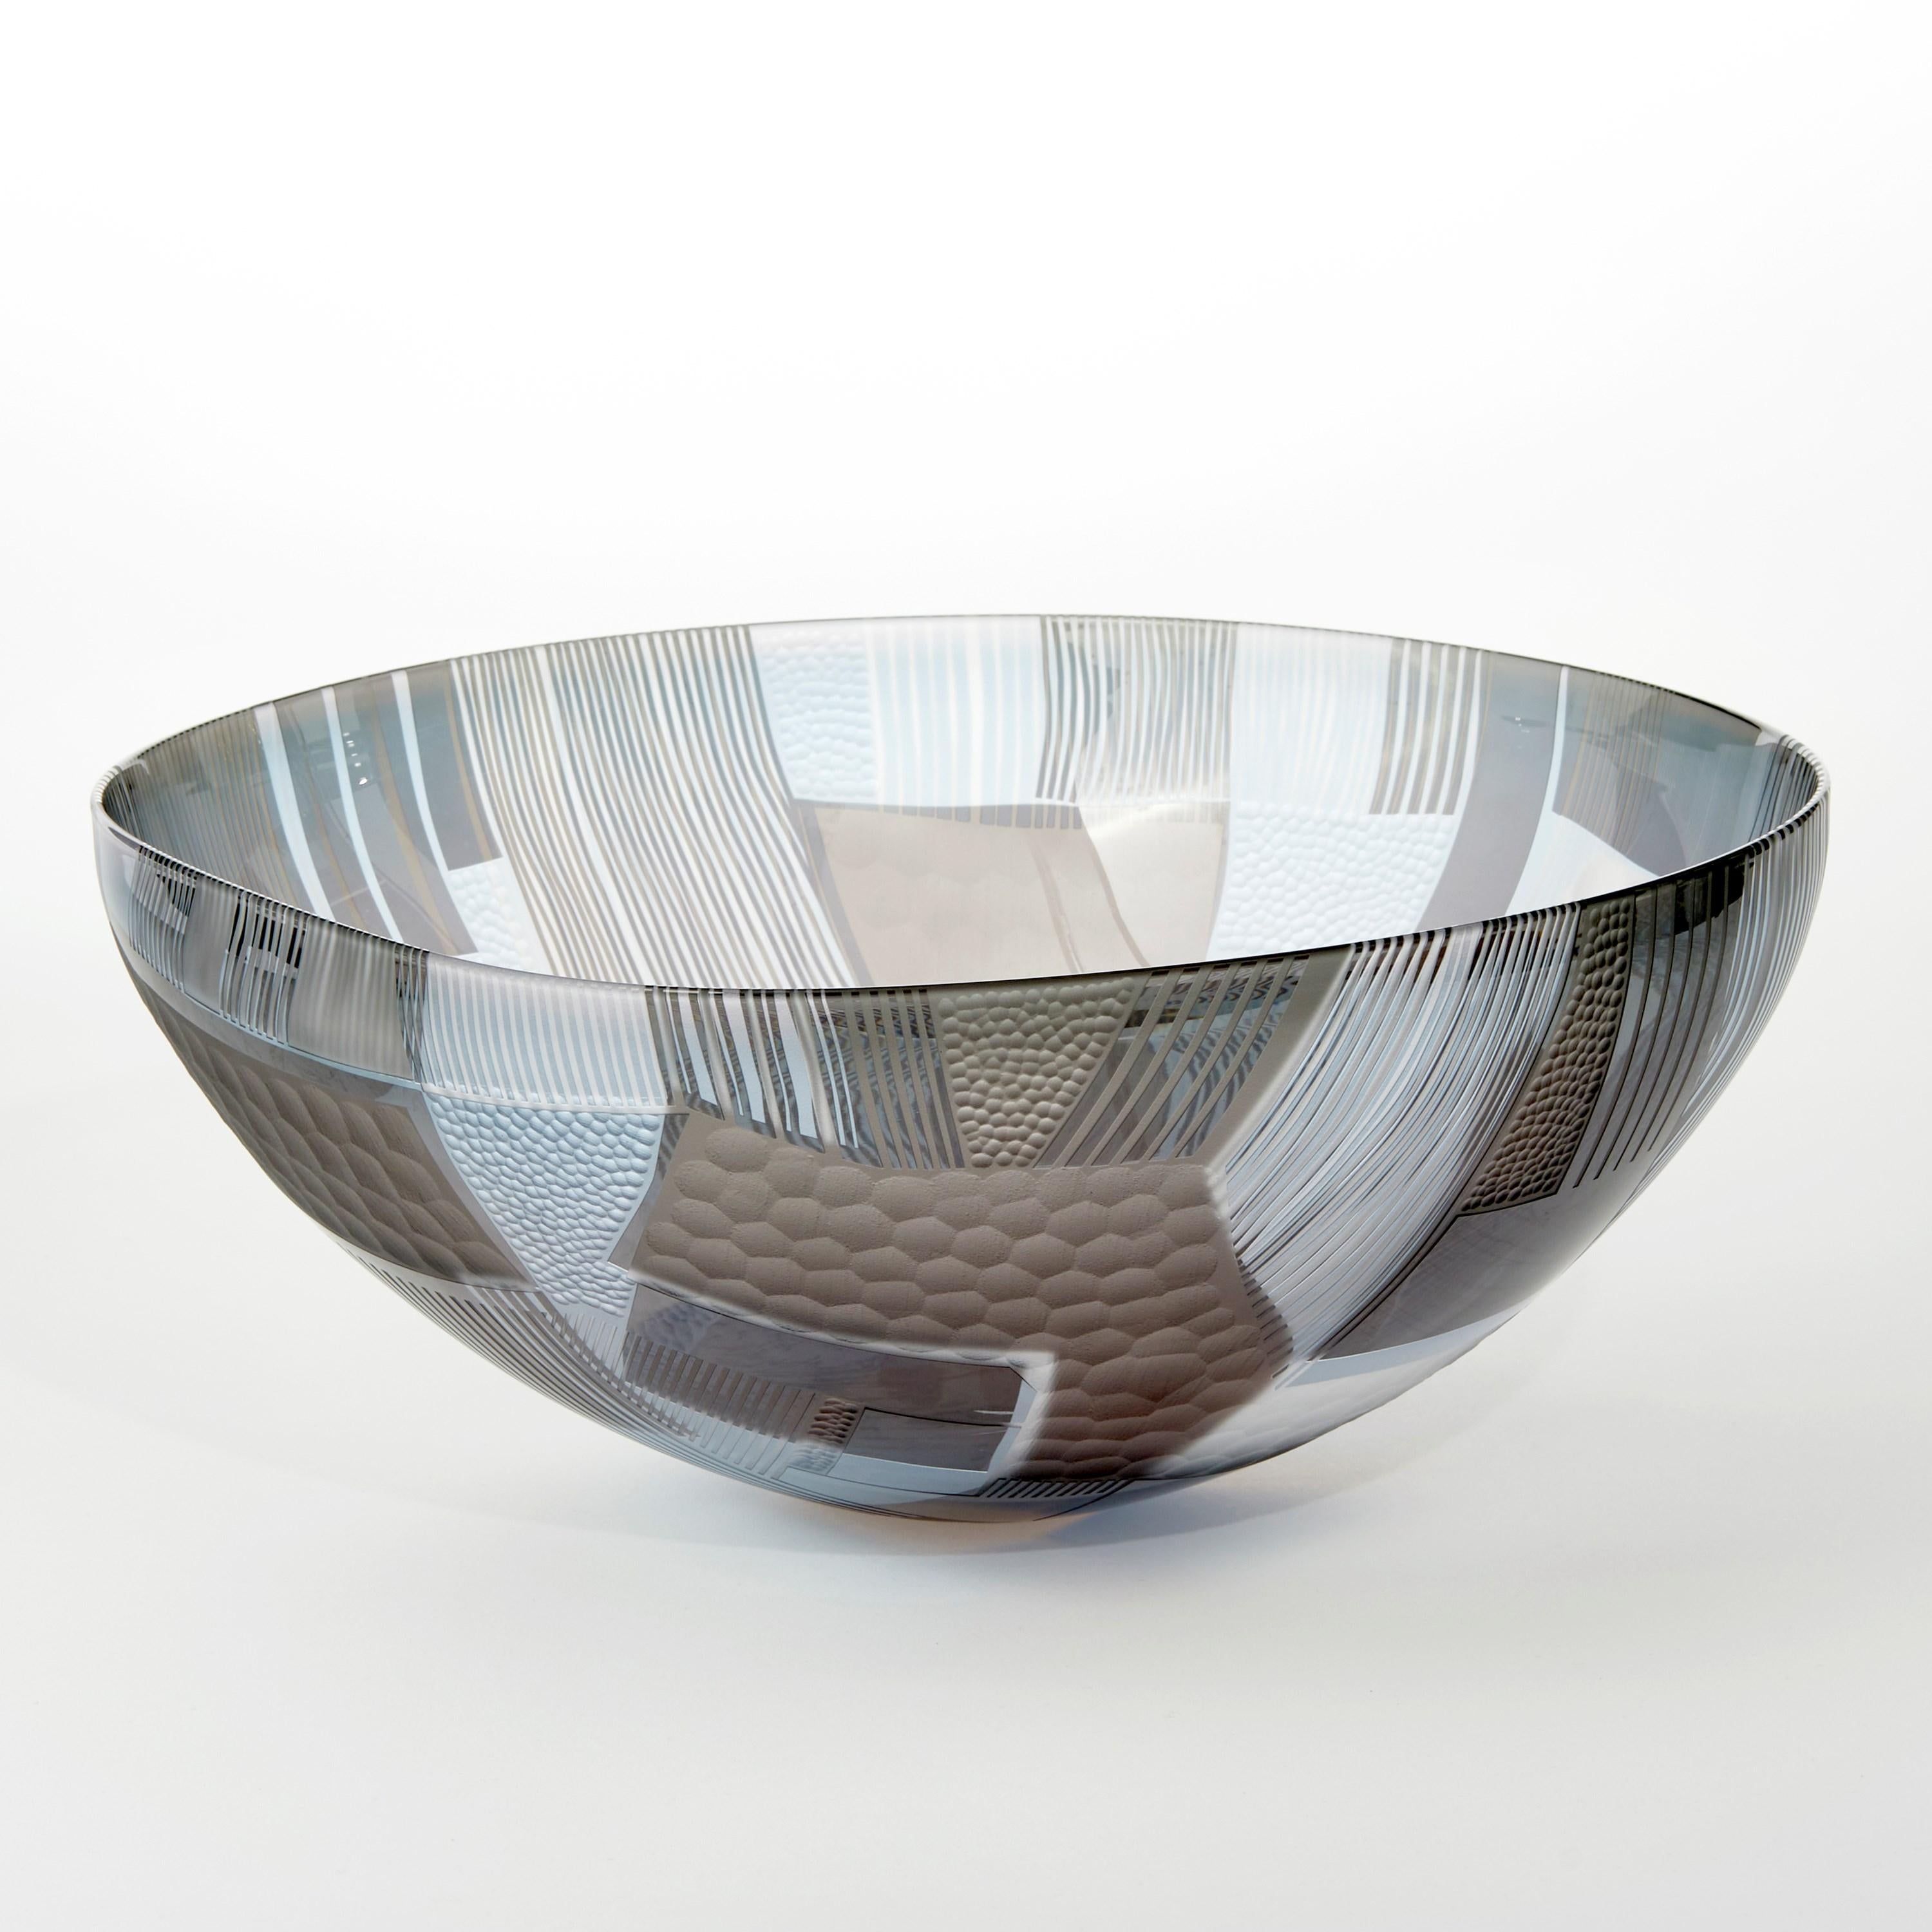 Organic Modern Abstracted Land Winter Blue over Sky Grey, a cut glass bowl by Kate Jones For Sale